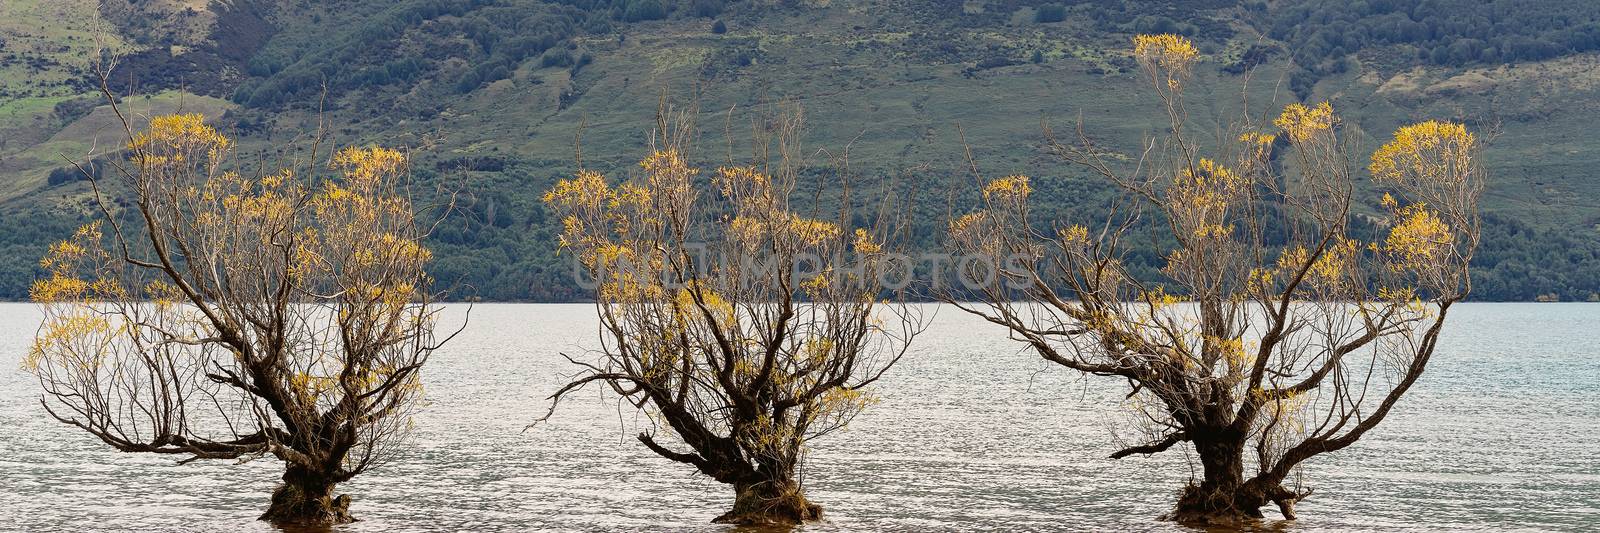 Three Trees Growing In A Lake by 	JacksonStock